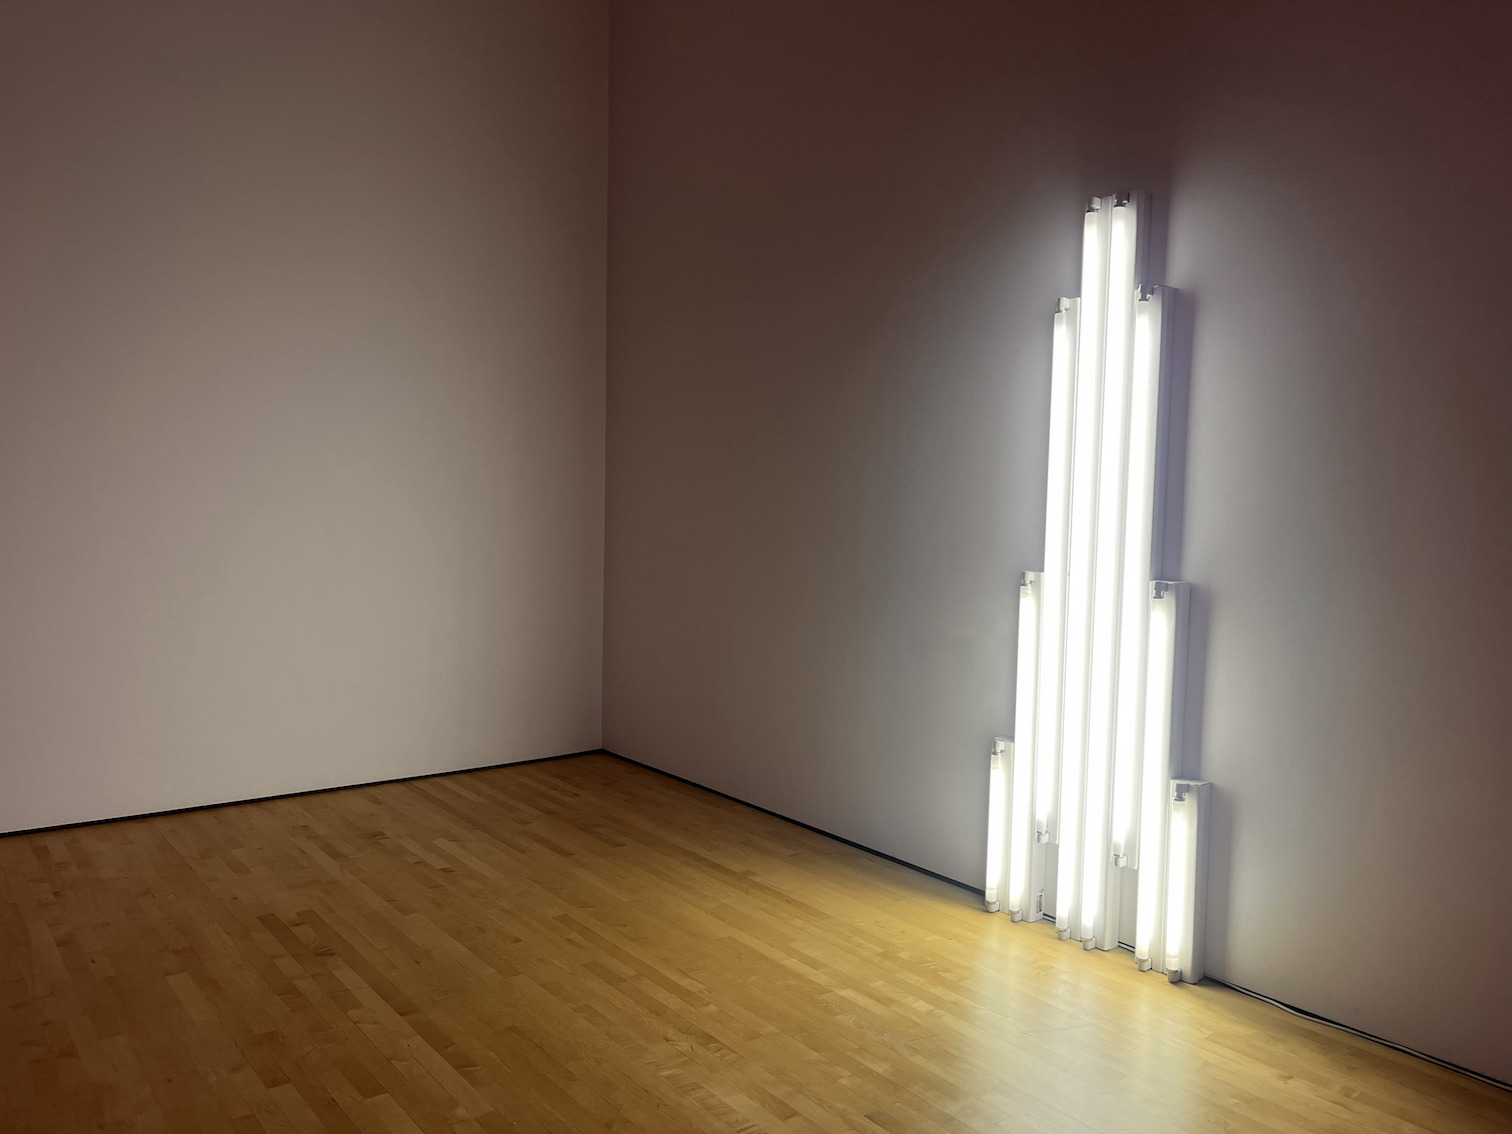 Disability Accessibility at SFMOMA. "Monument" for V. Tatlin by Dan Flavin. A white fluorescent neon light sculpture, reminiscent of a memorial shaped tower or pillar. It sits opposite of another Dan Flavin piece, with these two pieces being the only artworks that activate the space with neon light.